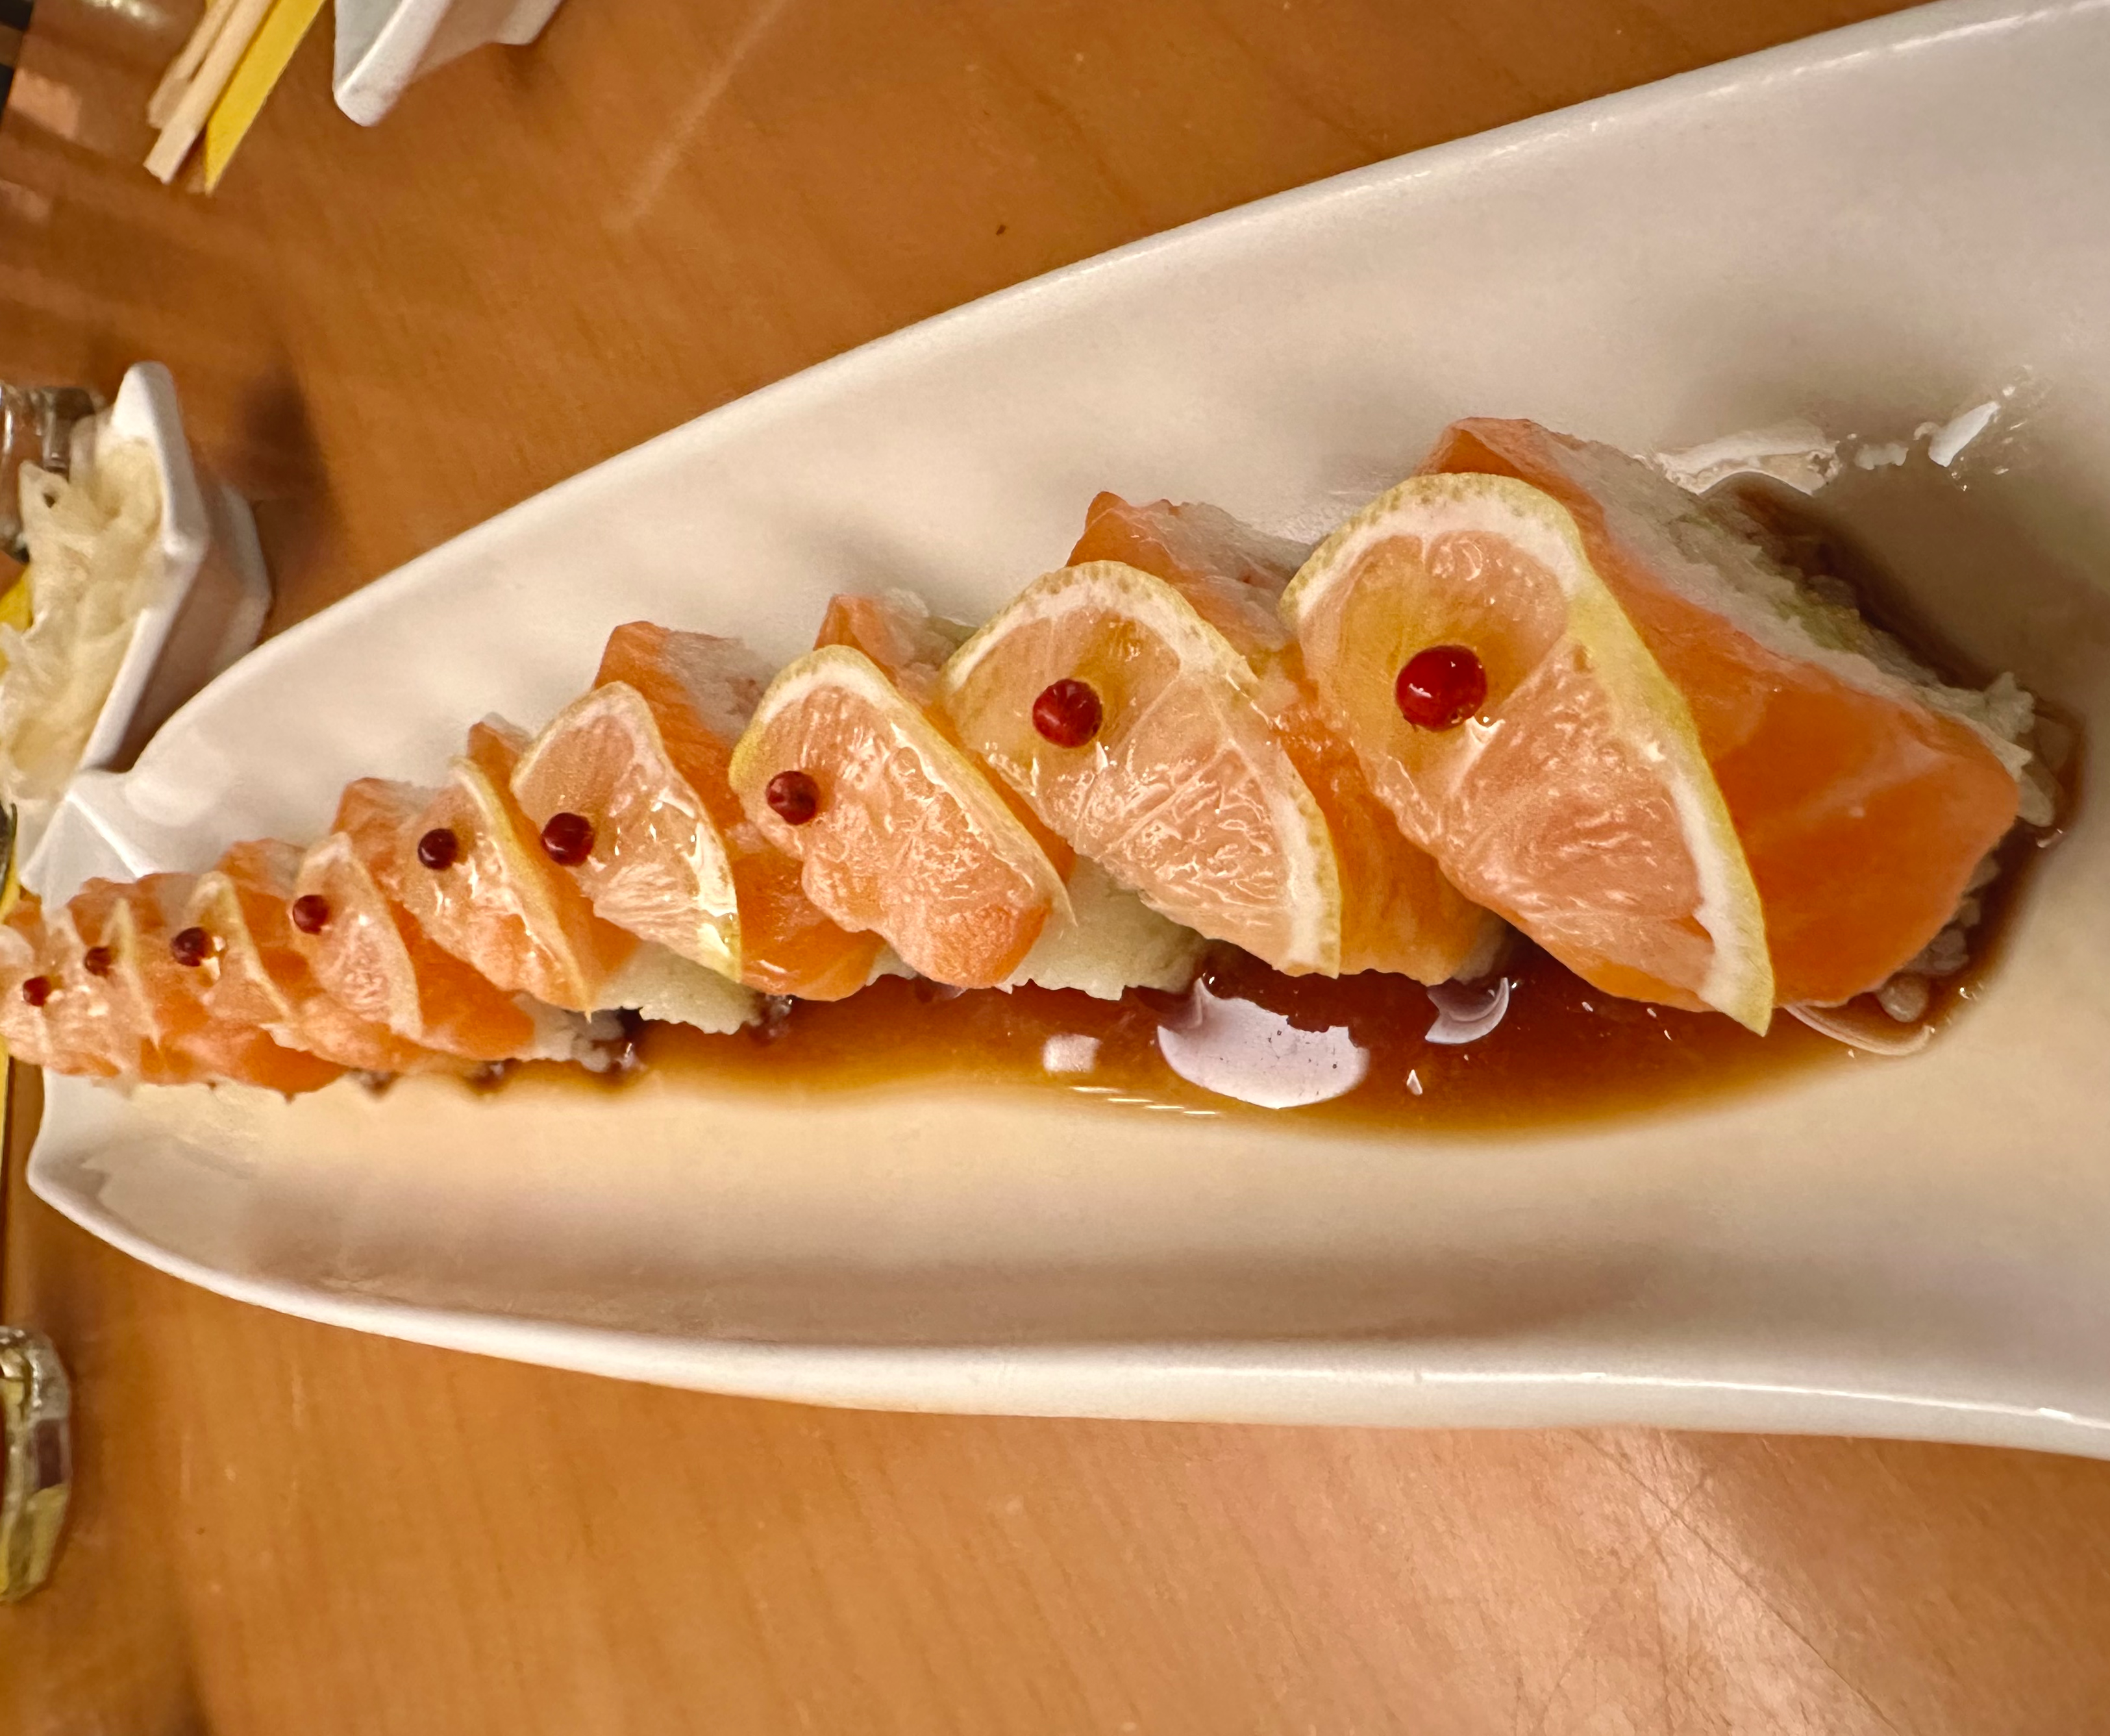 Sliced lemon was the perfect accompaniment to the sushi